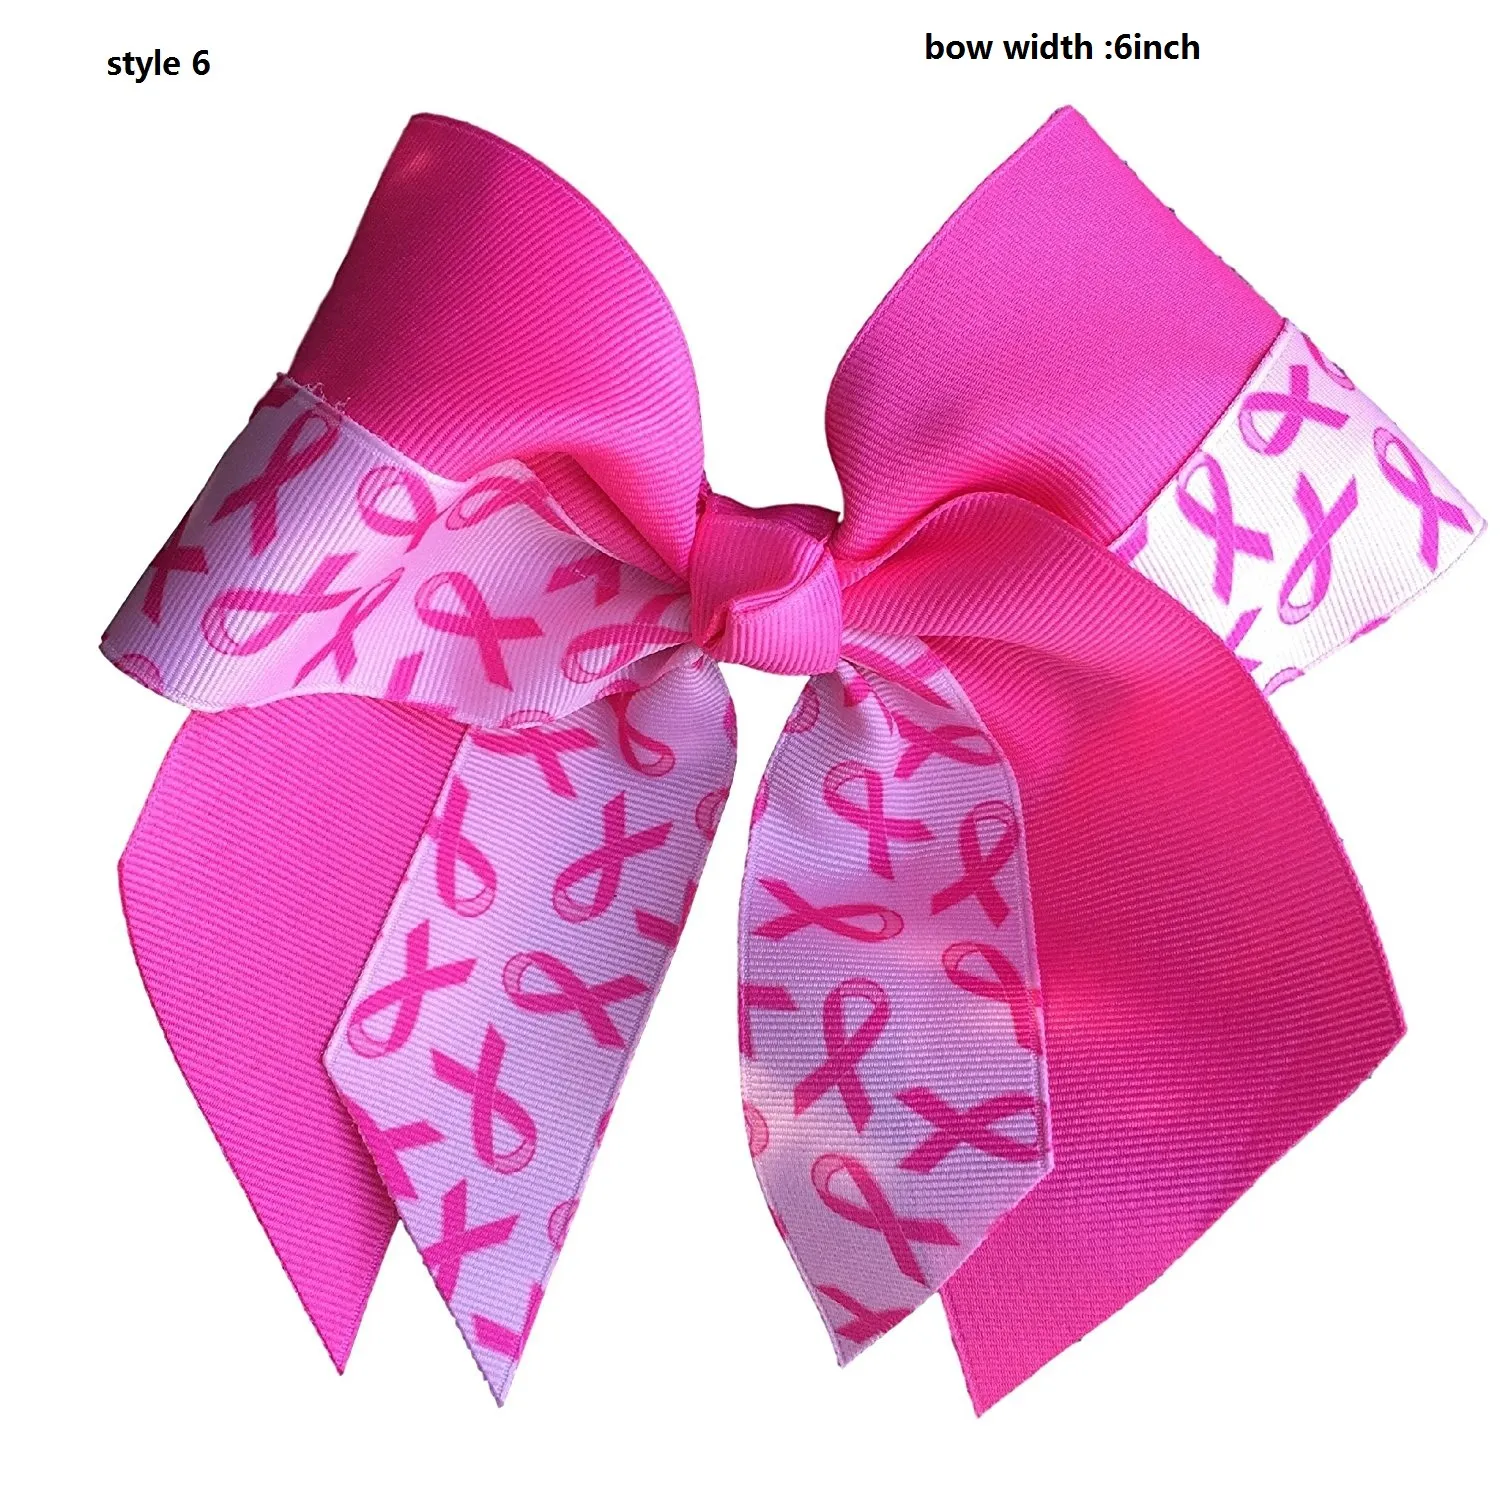 8" Breast Cancer Cheer Bows With Elastic Hair Band For Kids Girls Large Handmade Printed Ribbon Hair Bows Hair Accessories 11style 